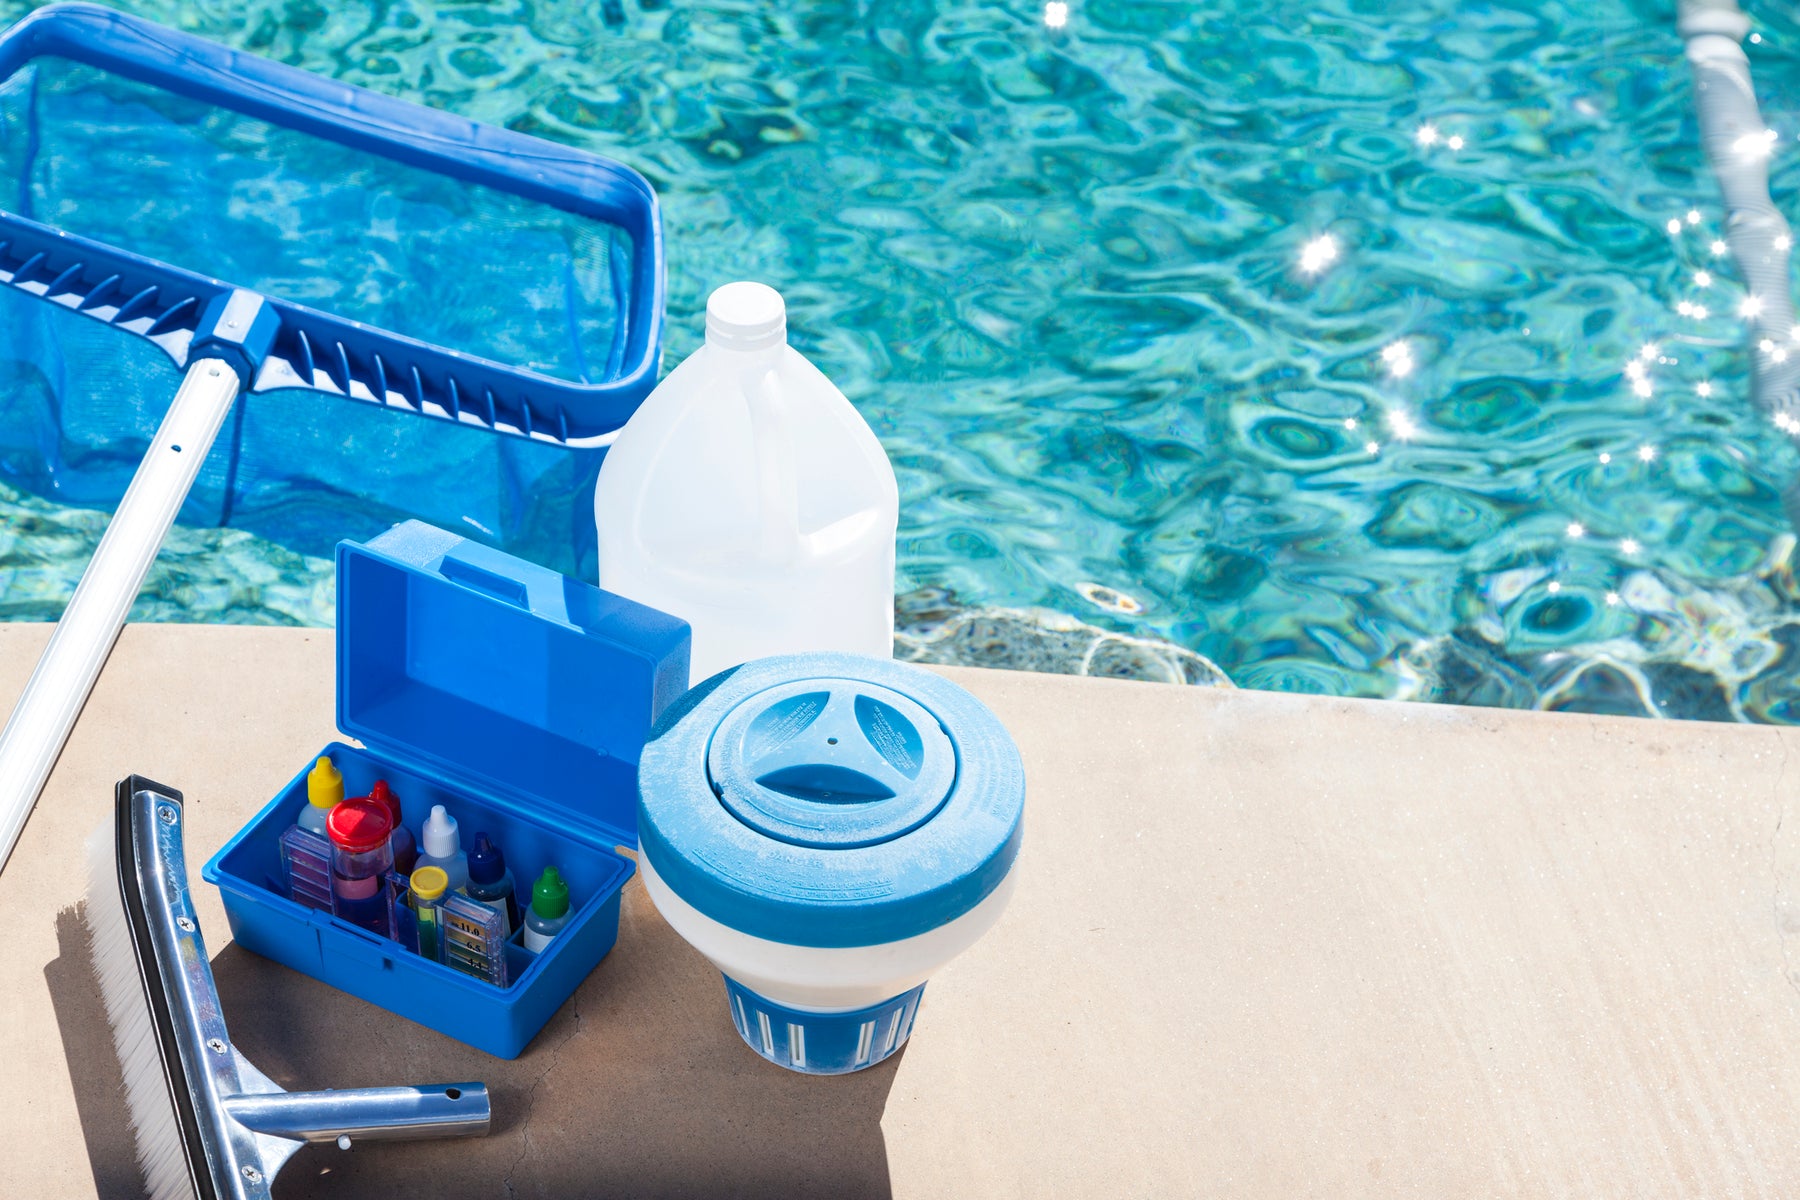 Swimming Pool Equipment Checklist: What You Need for Your Pool